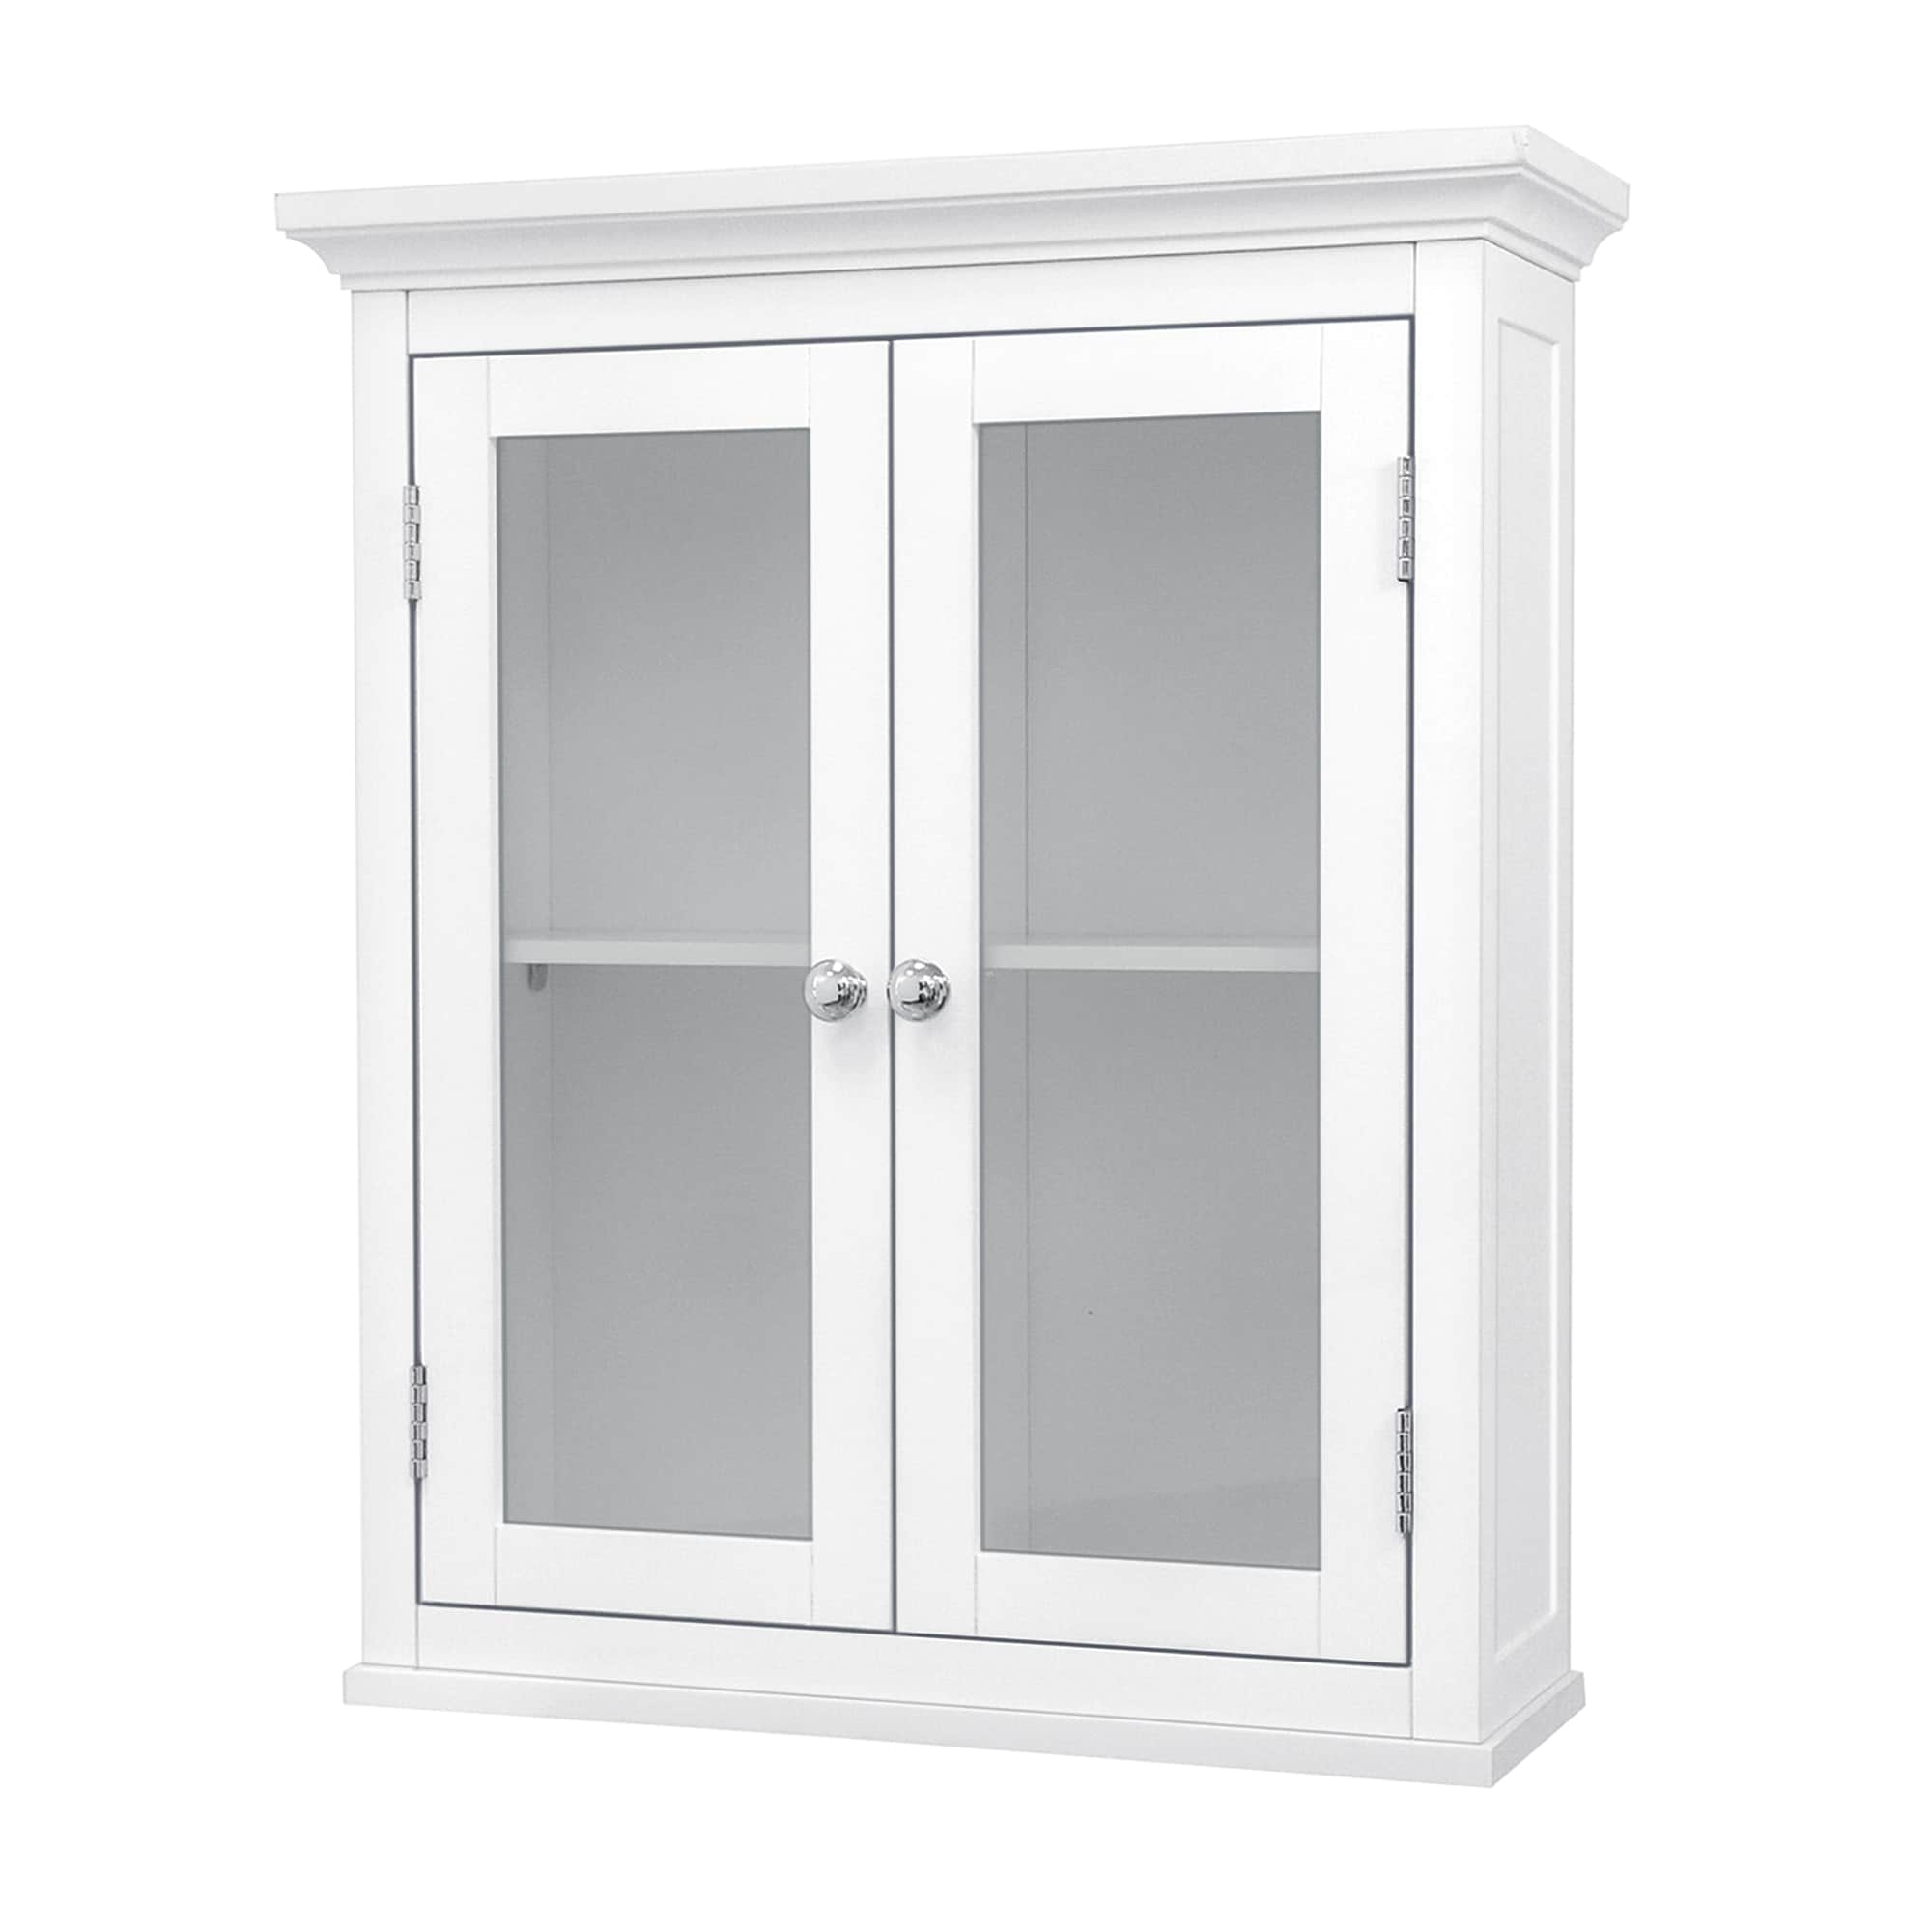 RiverRidge Home Madison Collection 2 Door Wall Cabinet - White